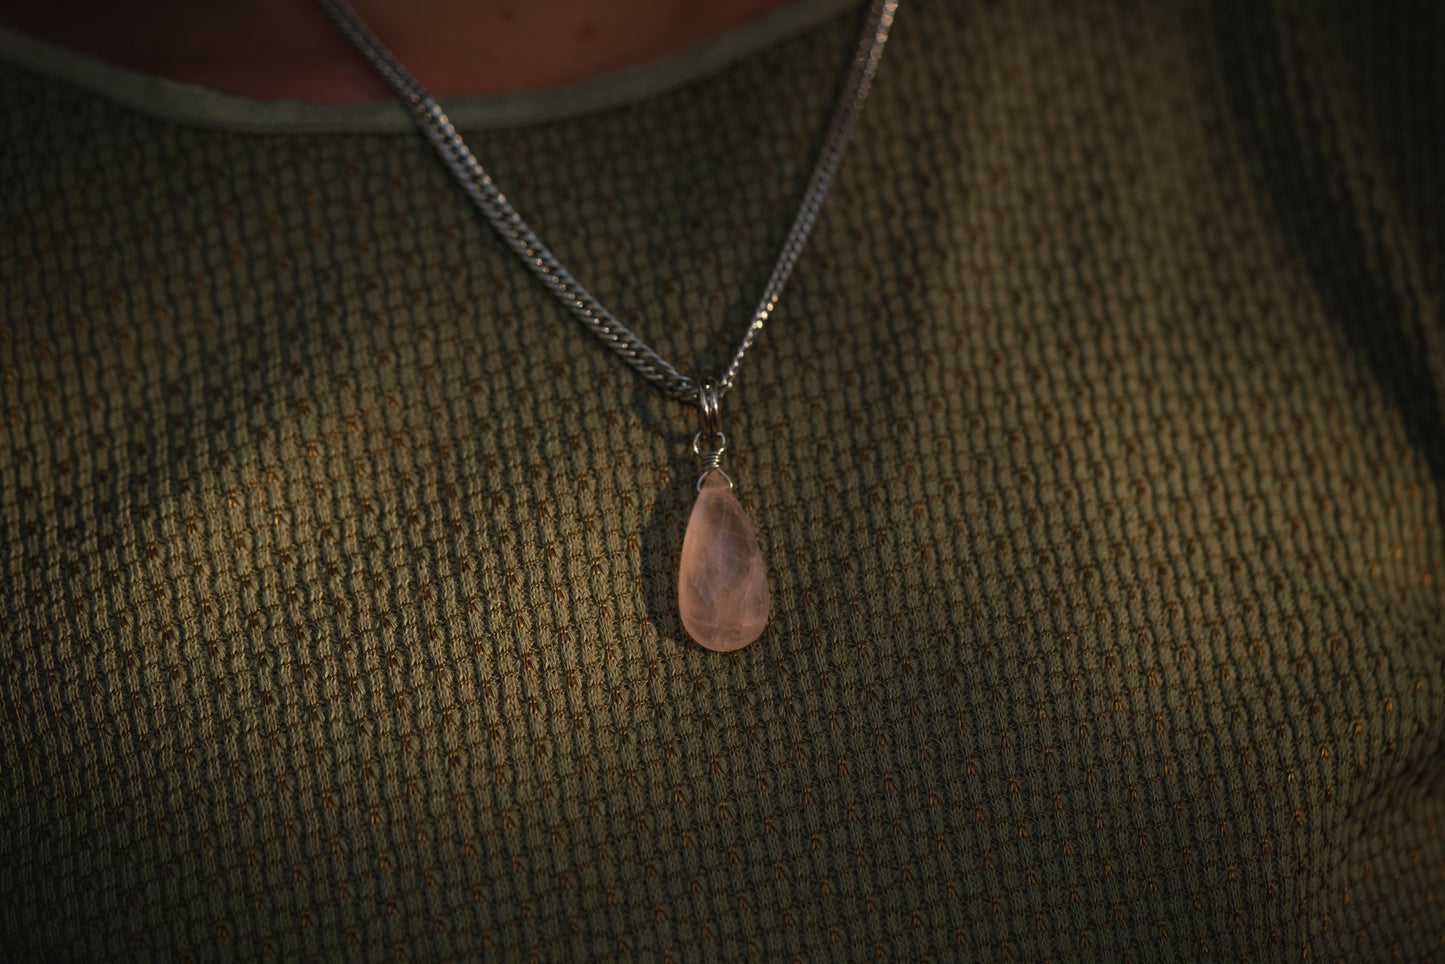 'Powerful in Pink' Rose Quartz Drop Semi Chonk Stainless Steel Necklace